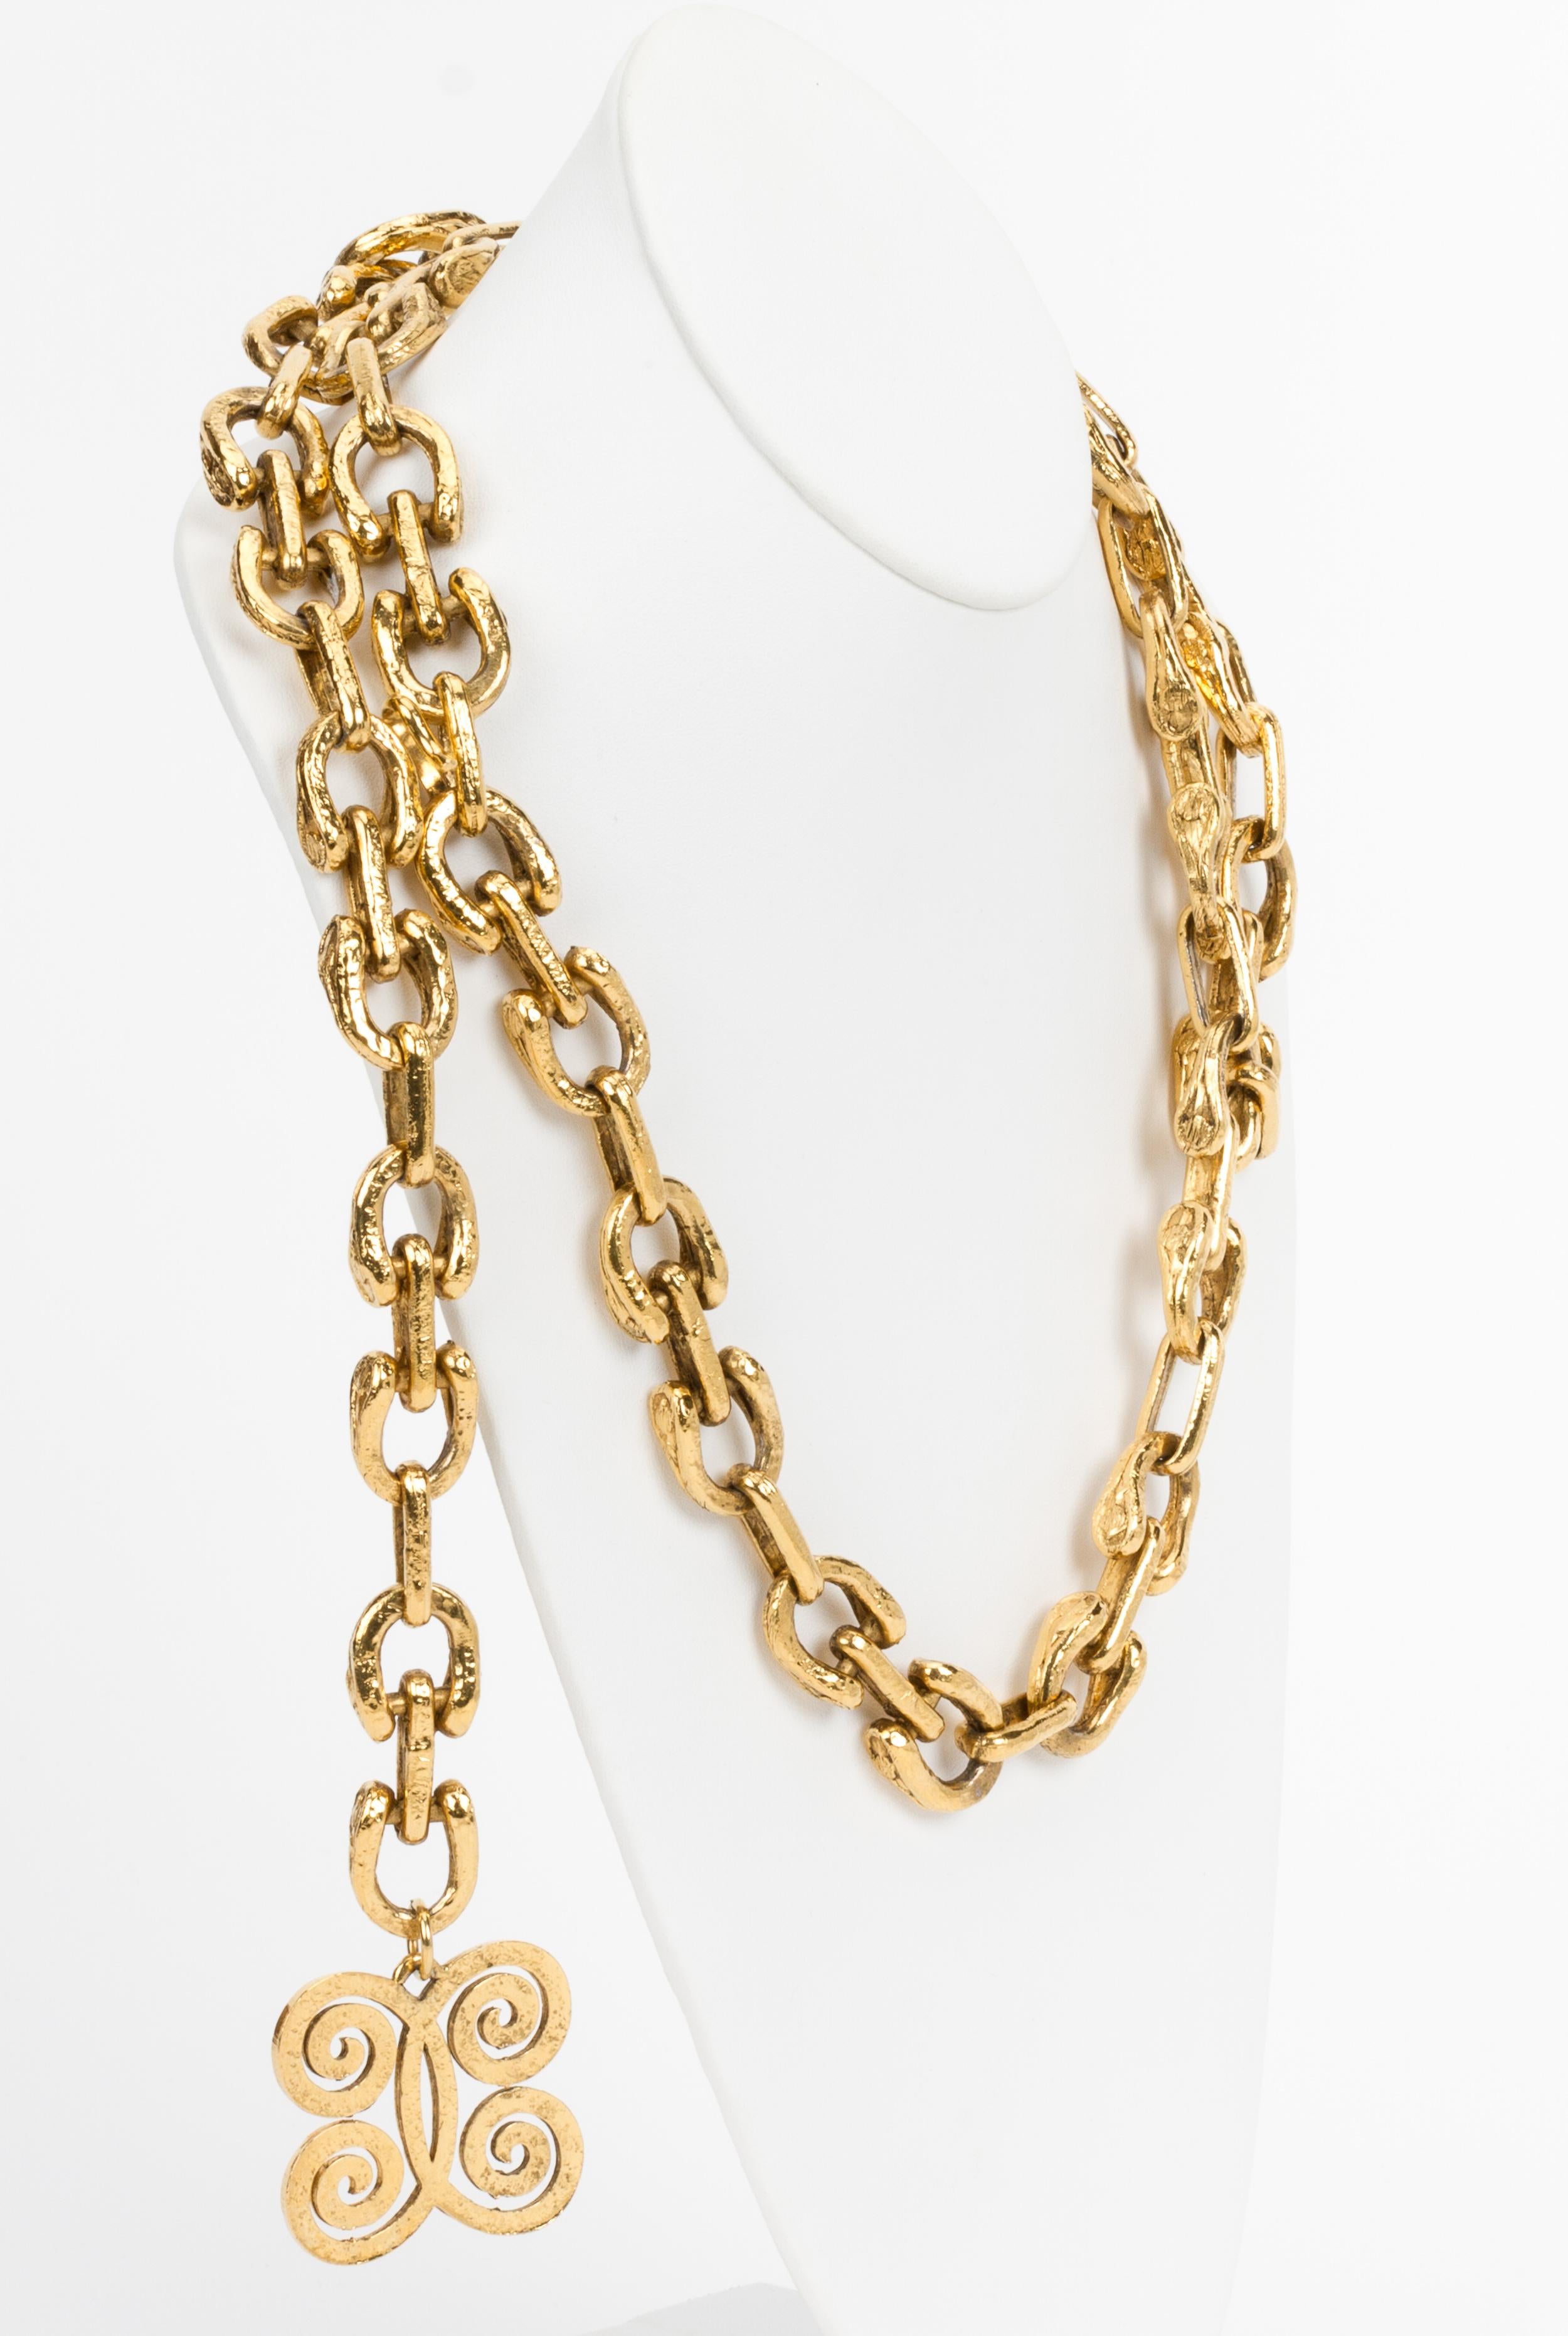 Chanel 70s heavy duty oversized link chain/necklace with butterfly charm. Excellent condition. Comes with original box.